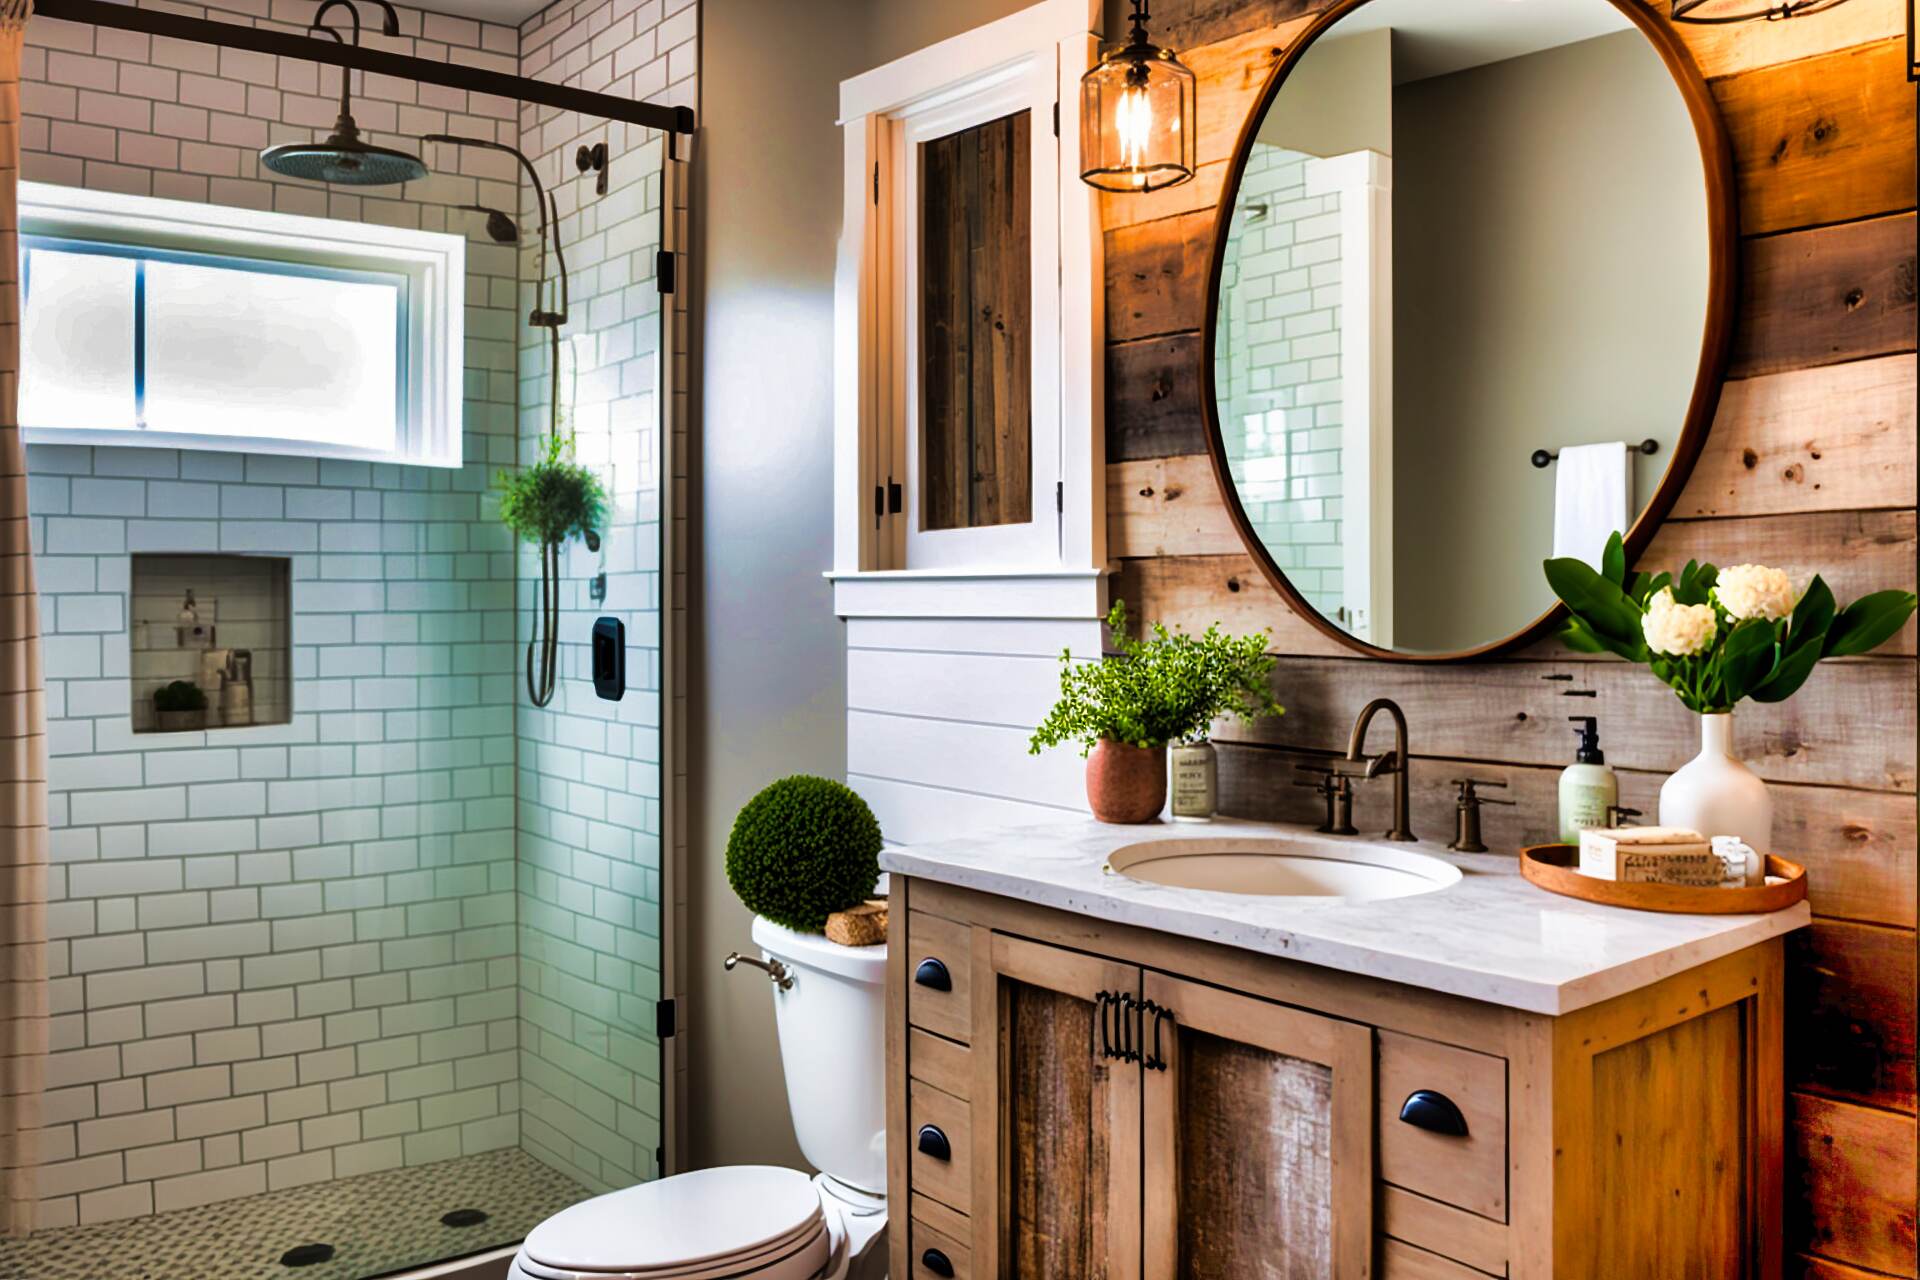 A Modern Bathroom With A Rustic Aesthetic. The Space Features A Reclaimed Wood Vanity With A White Sink And A Large Round Mirror. The Shower Has A Glass Partition And A Rainfall Showerhead. The Floors Are A Light Wood-Look Tile, And The Walls Are White Subway Tile With A Reclaimed Wood Accent Wall.